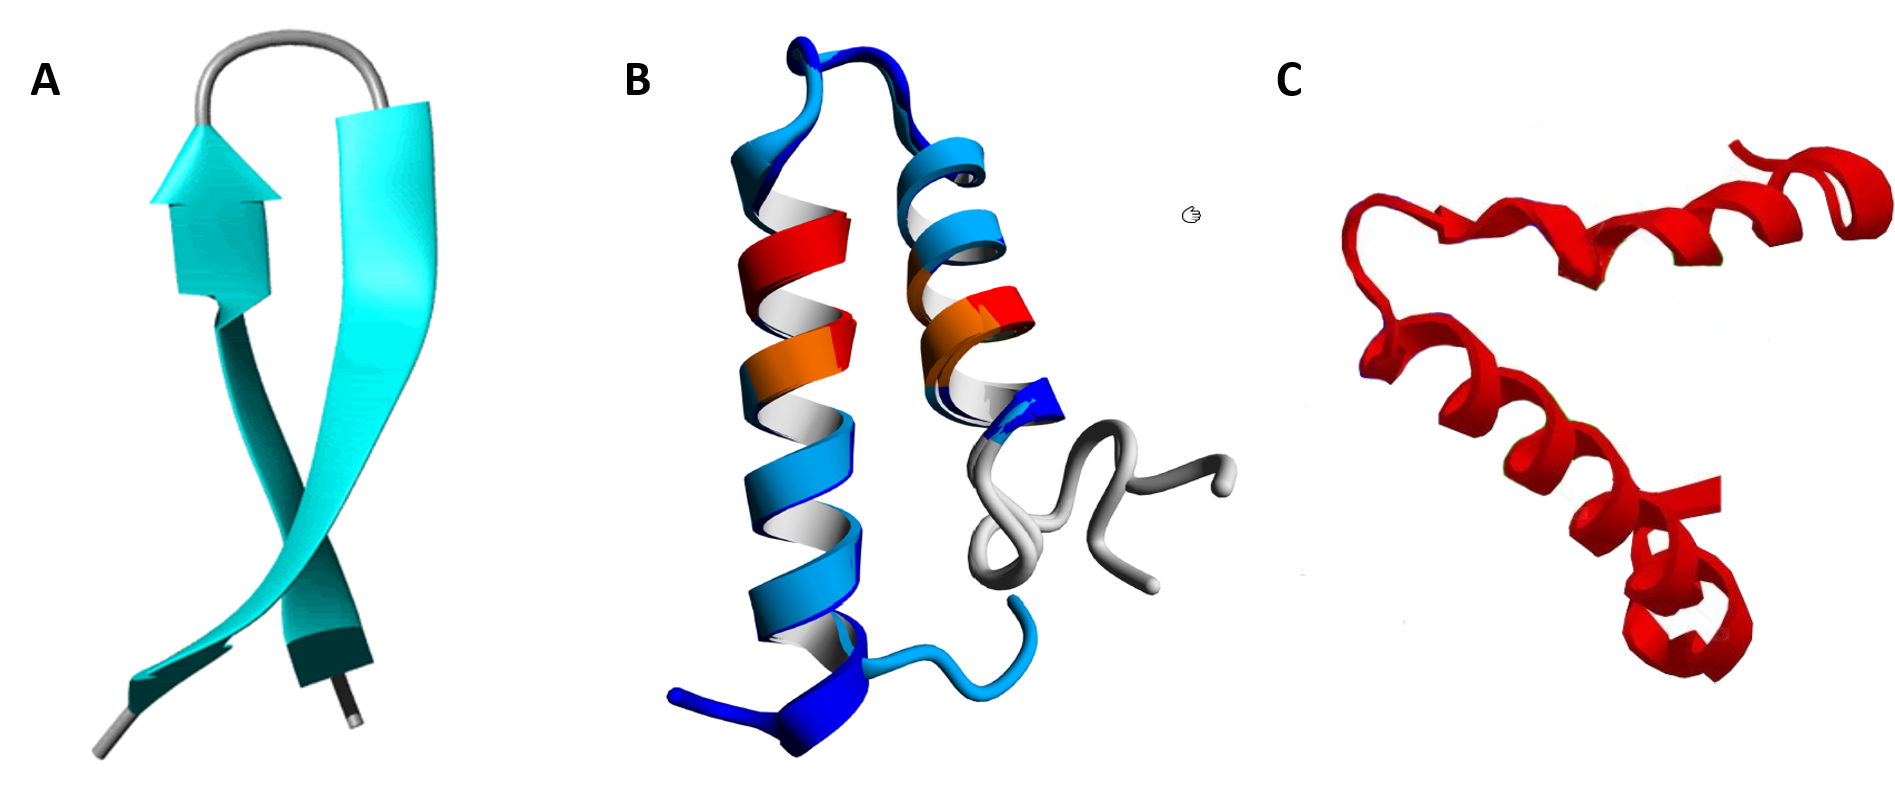 secondary structure of protein definition